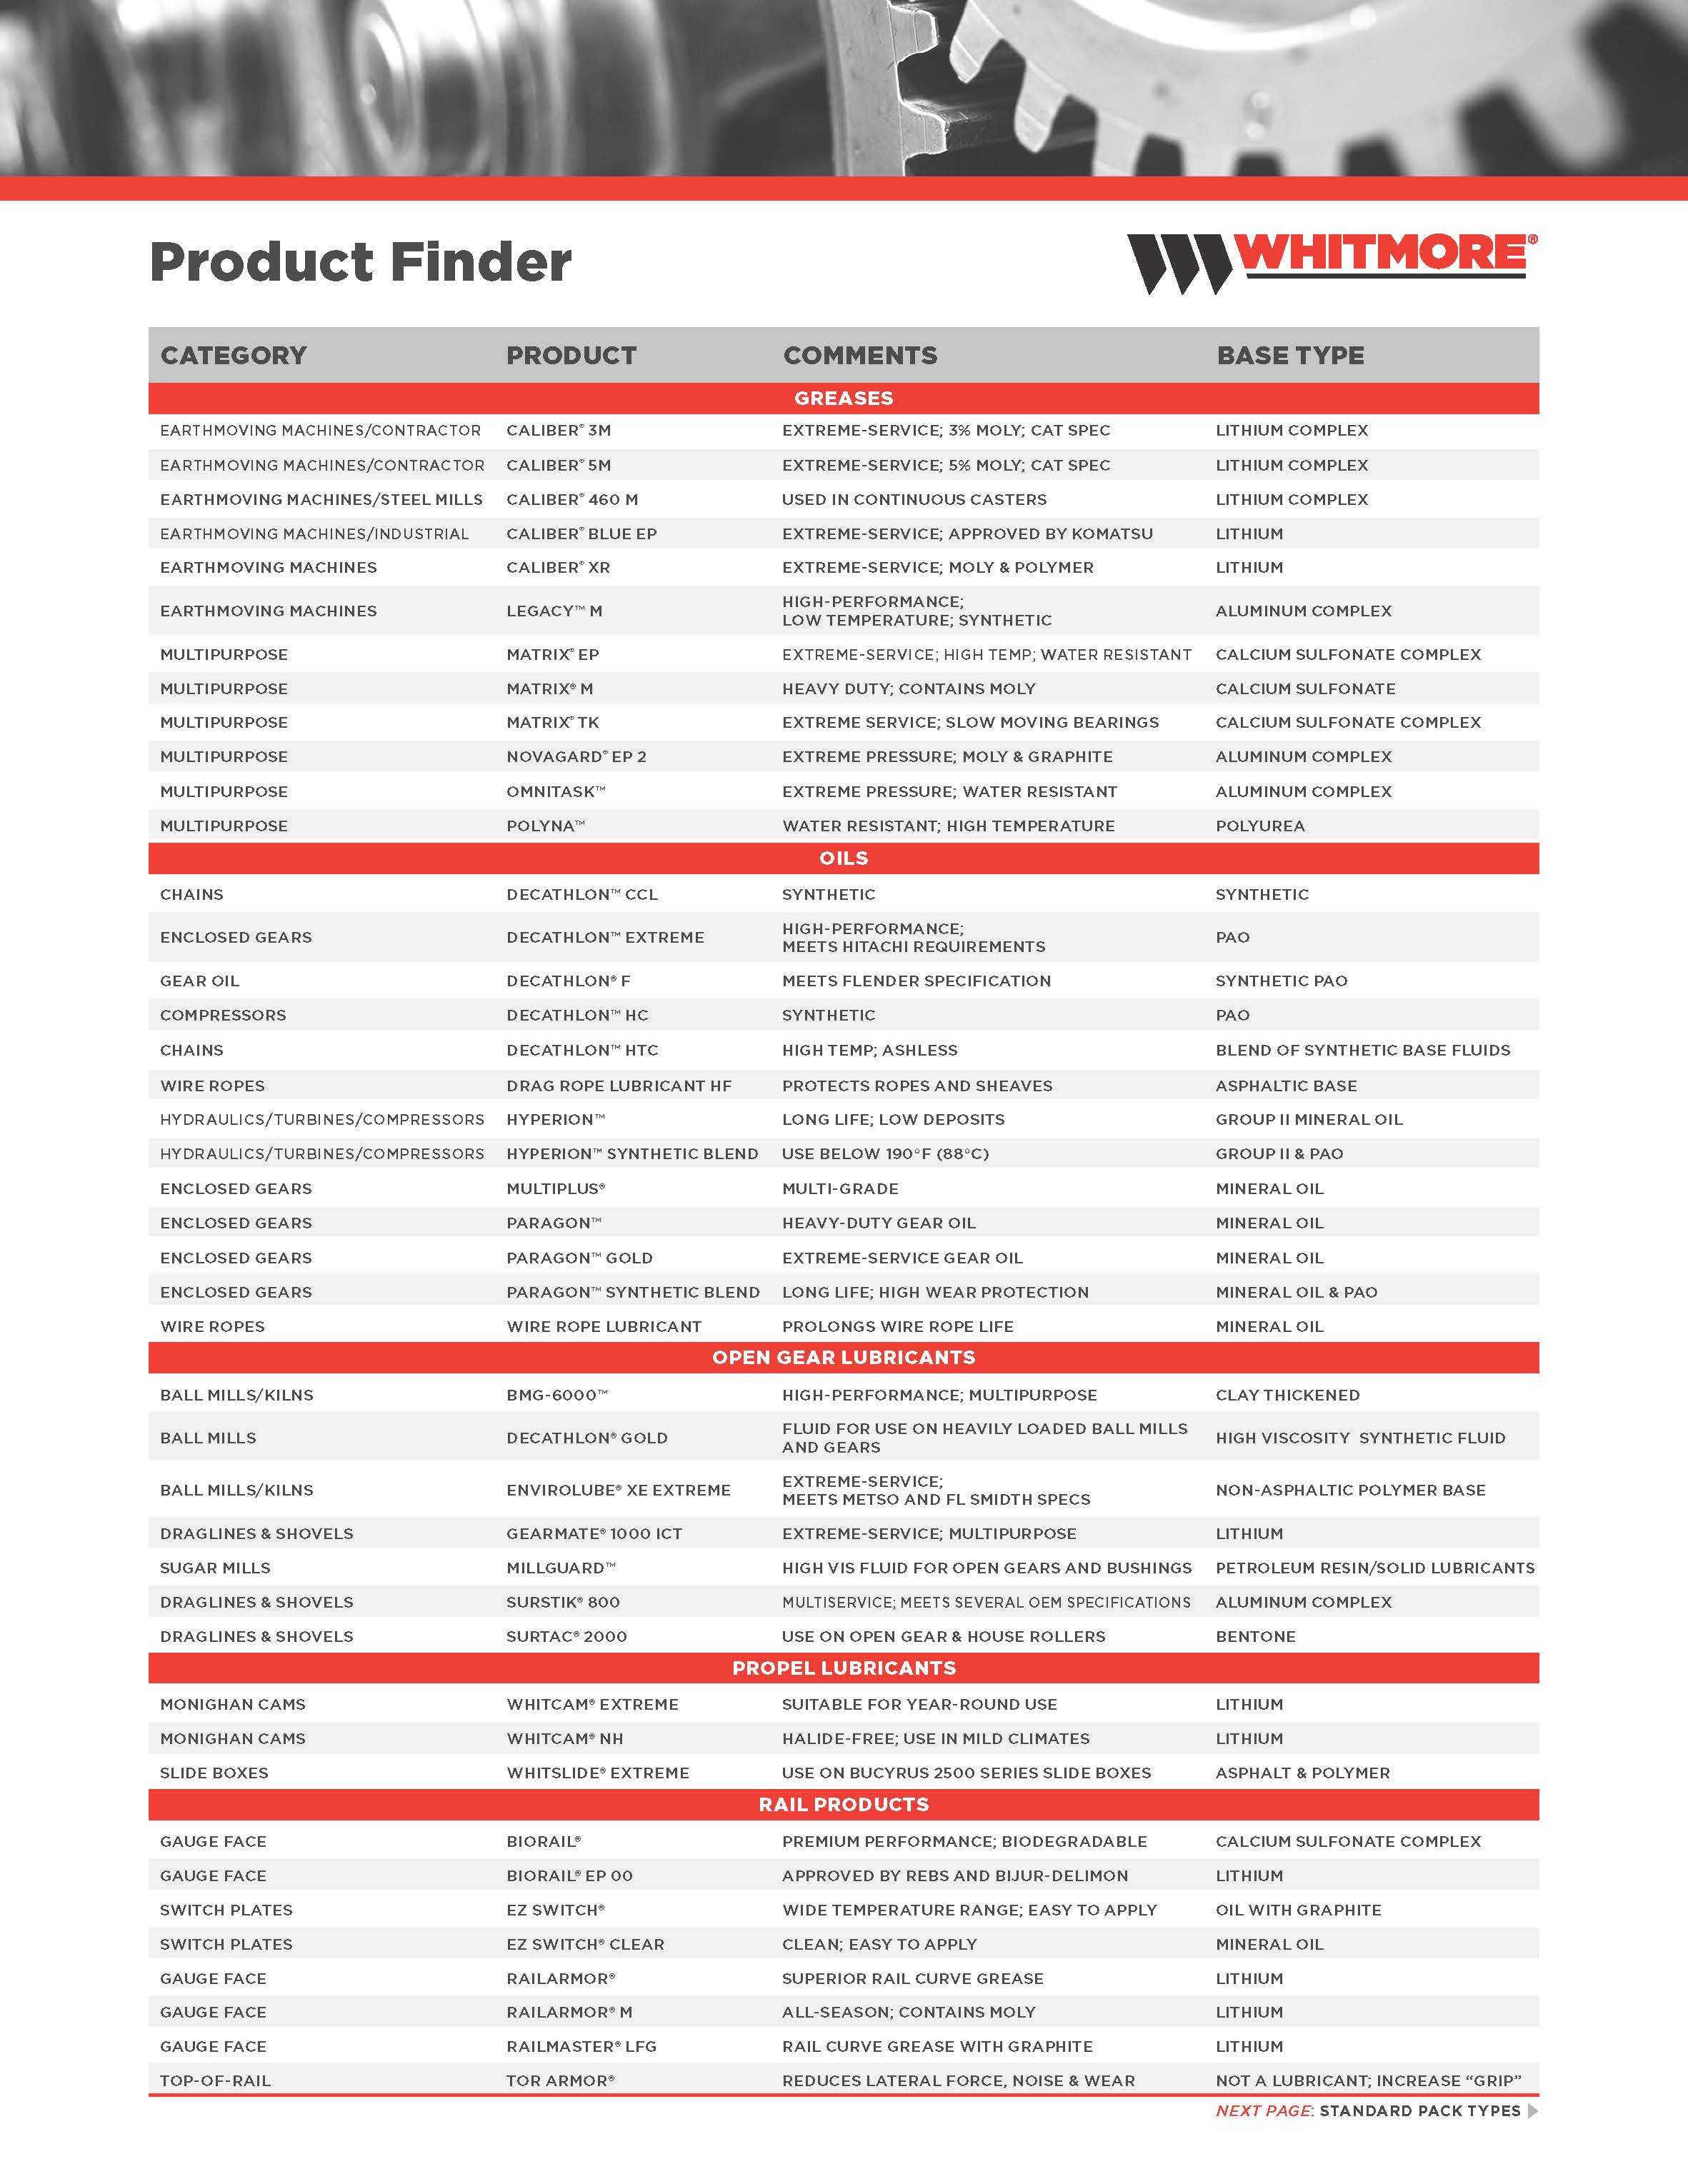 Whitmore Lubricants Product Finder & Pack Types